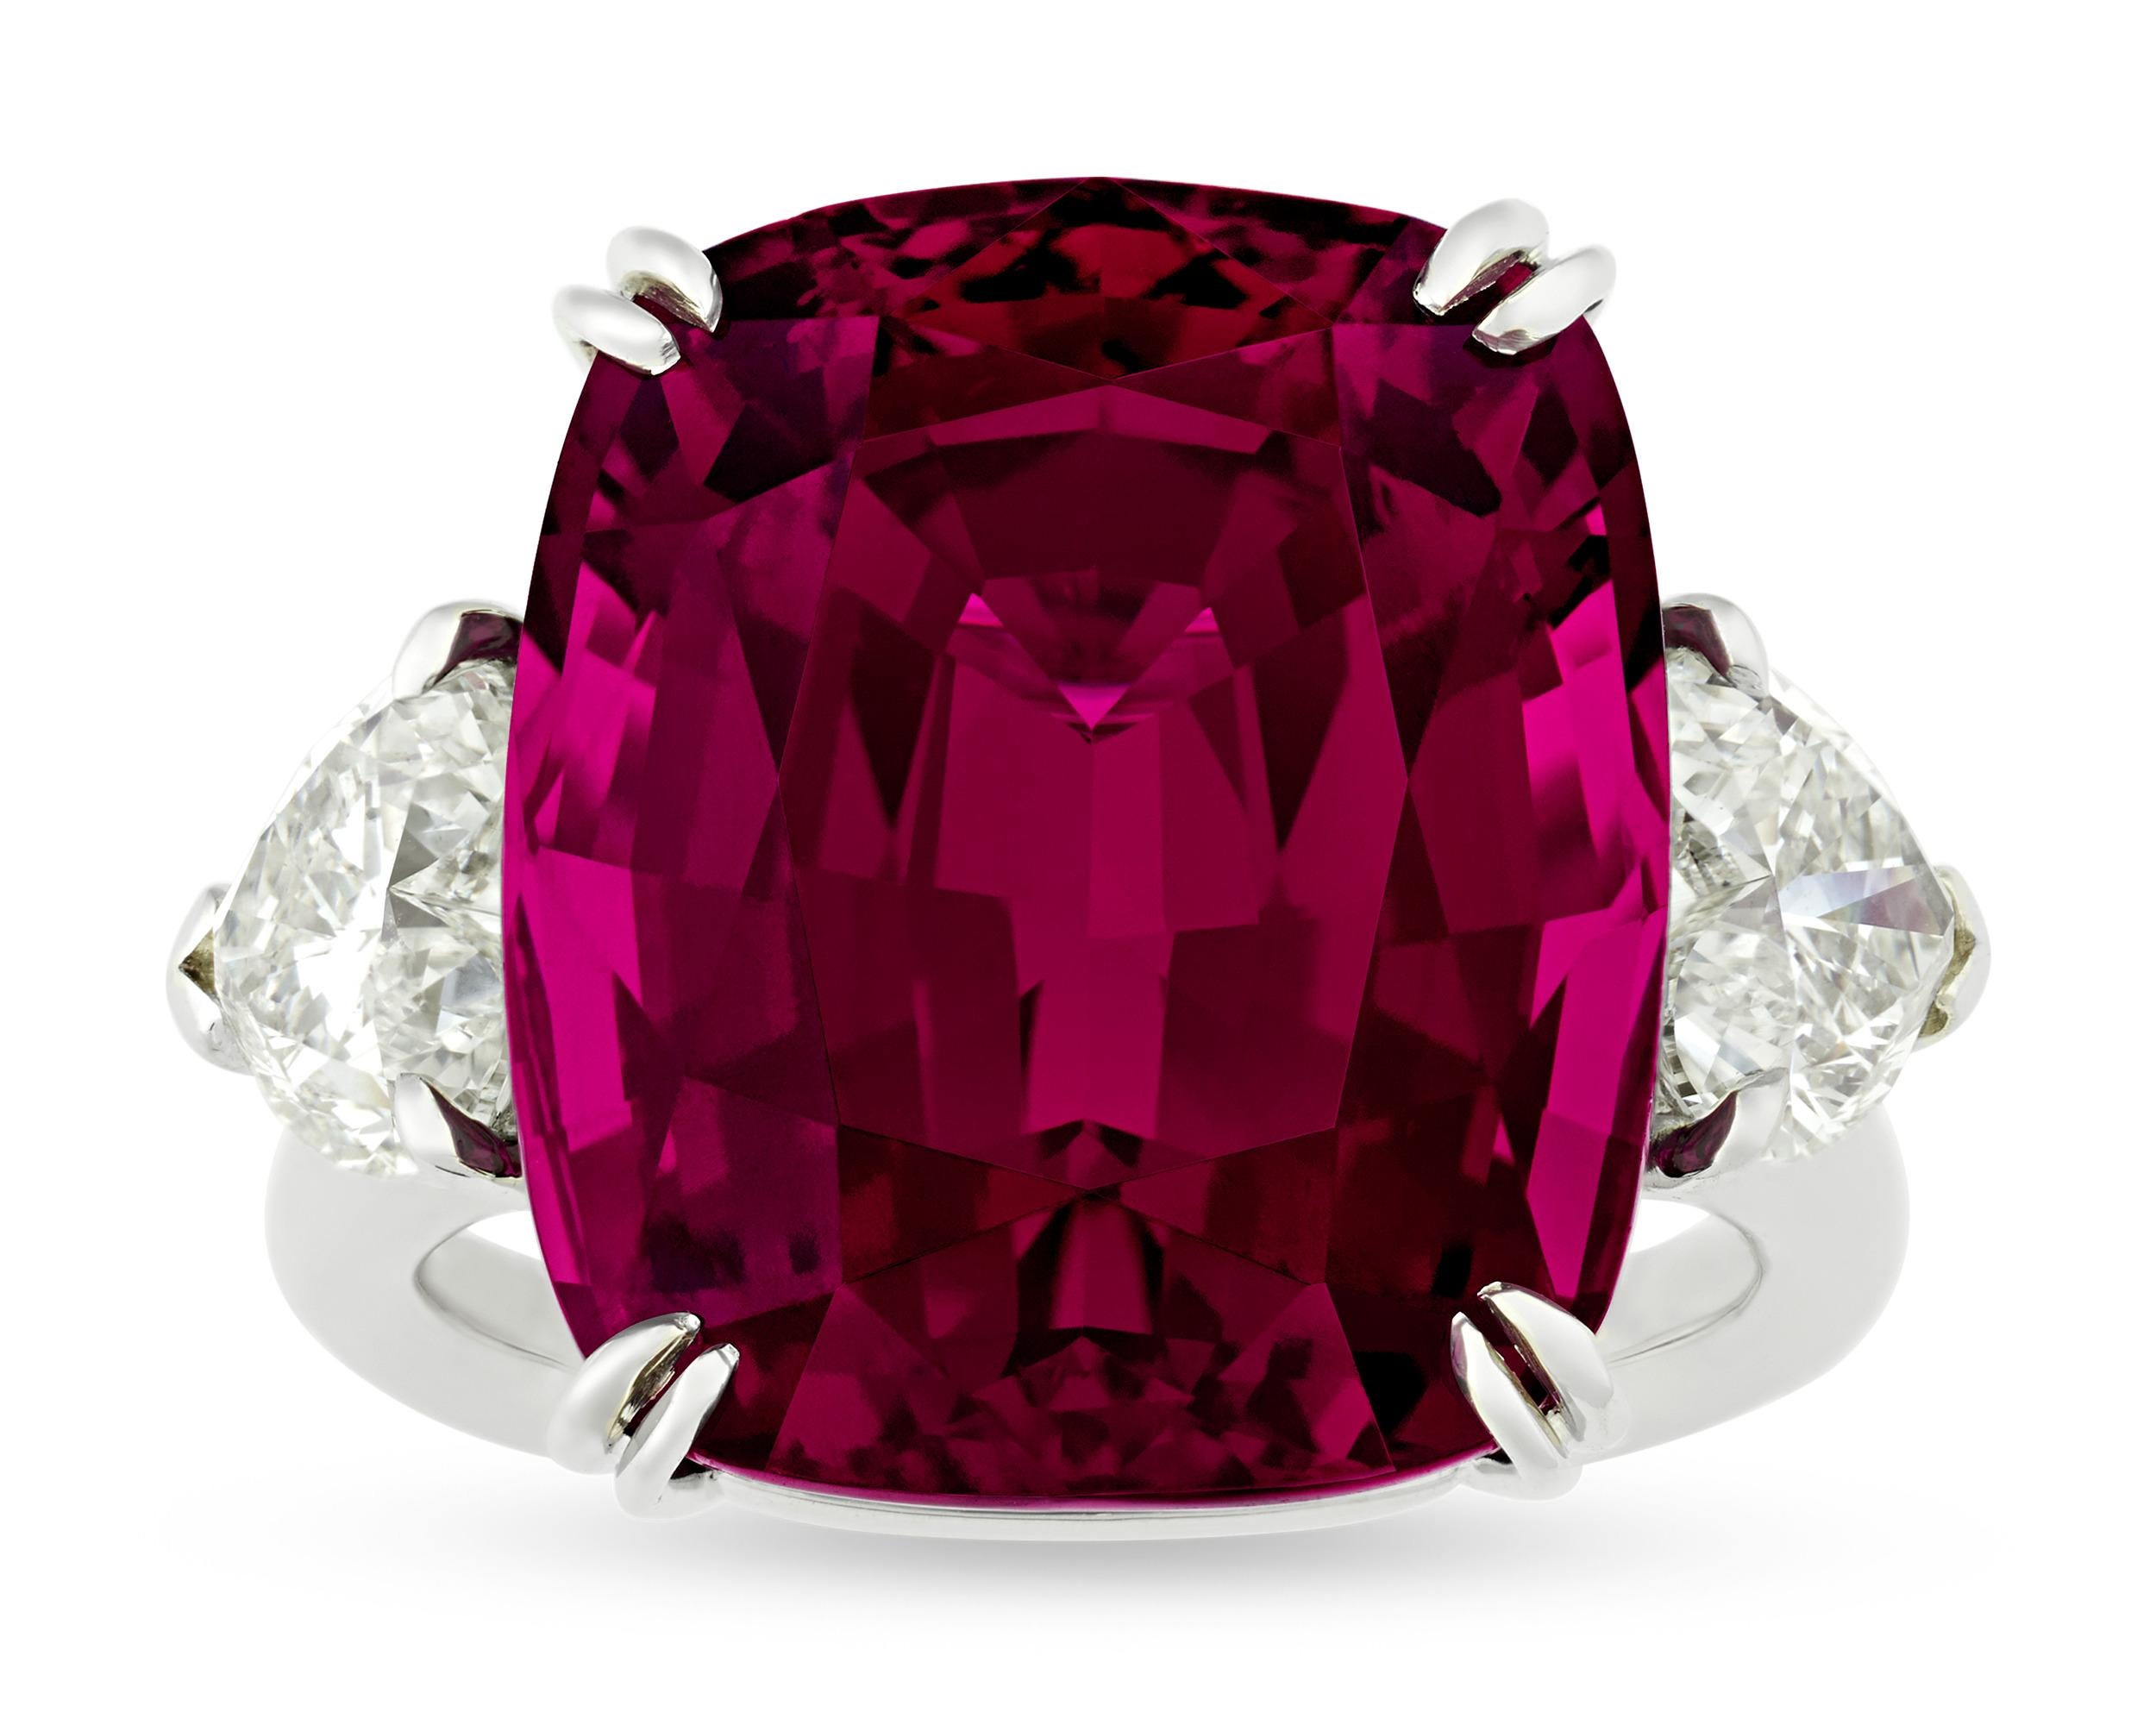 Heart Cut Umbalite Garnet Ring, 26.50 Carats For Sale